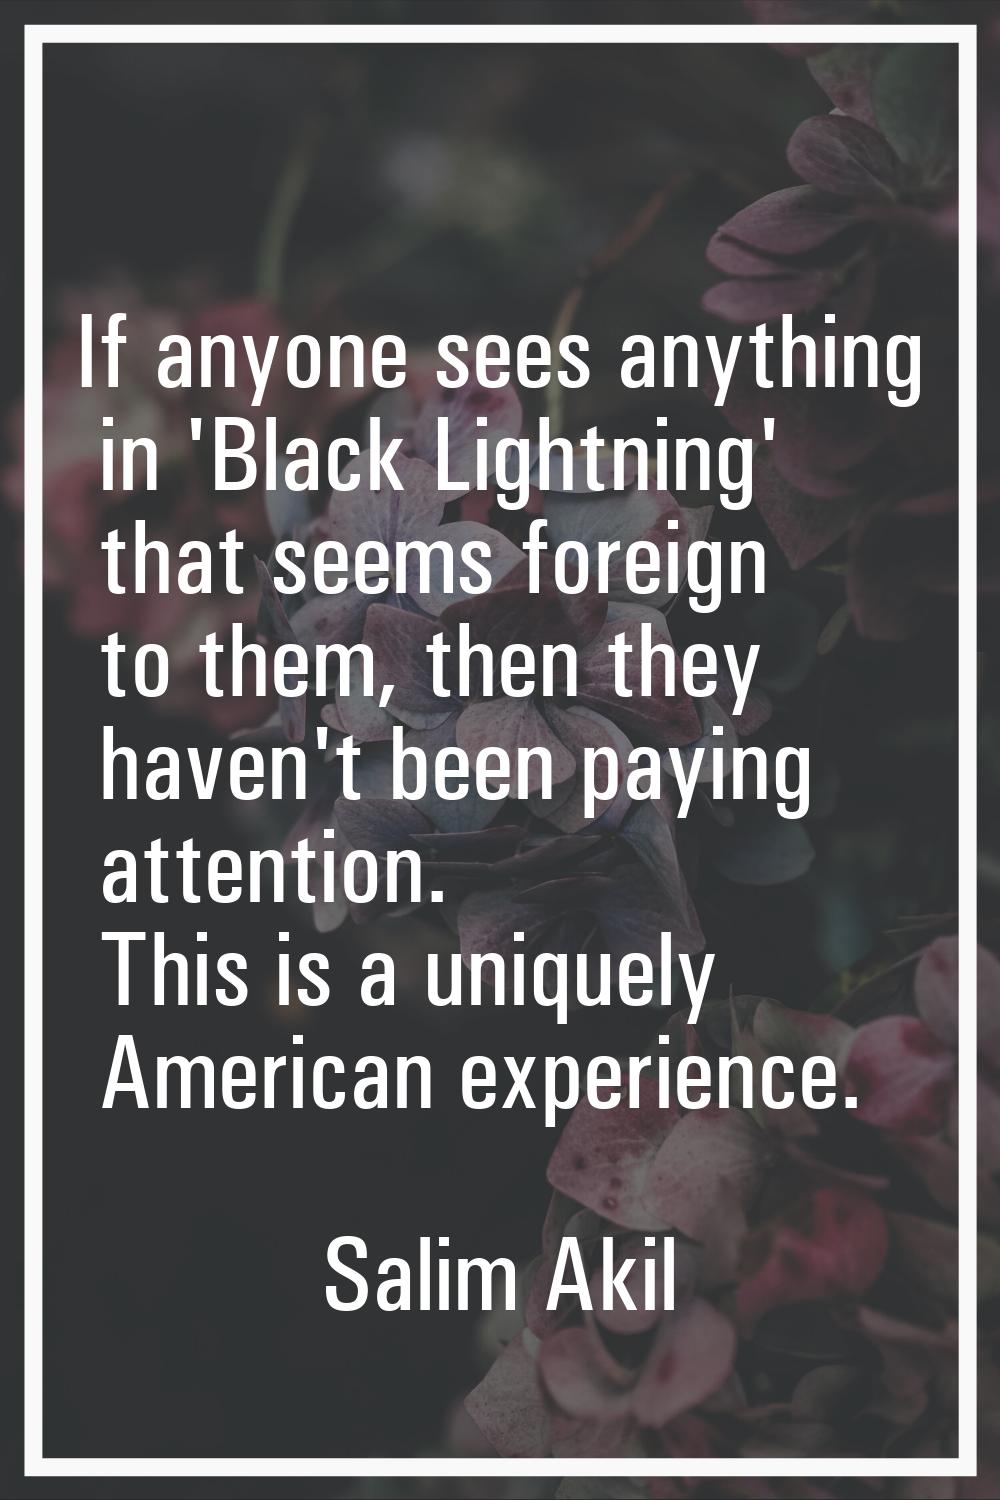 If anyone sees anything in 'Black Lightning' that seems foreign to them, then they haven't been pay